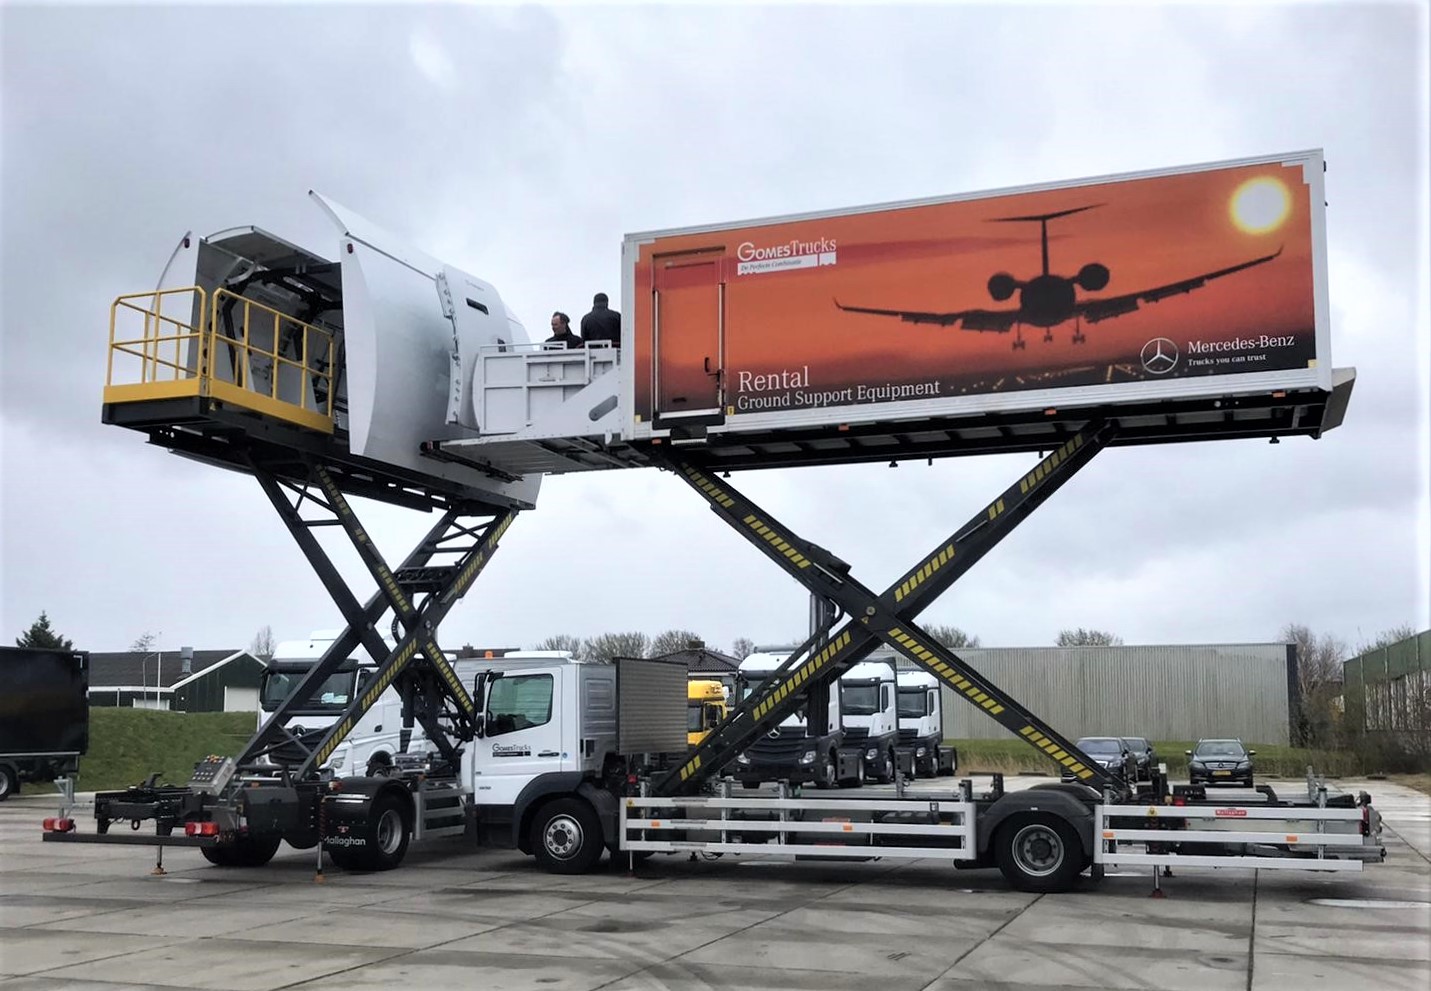 Schiphol Airport appoints Mallaghan to develop first mobile Airside Training Unit